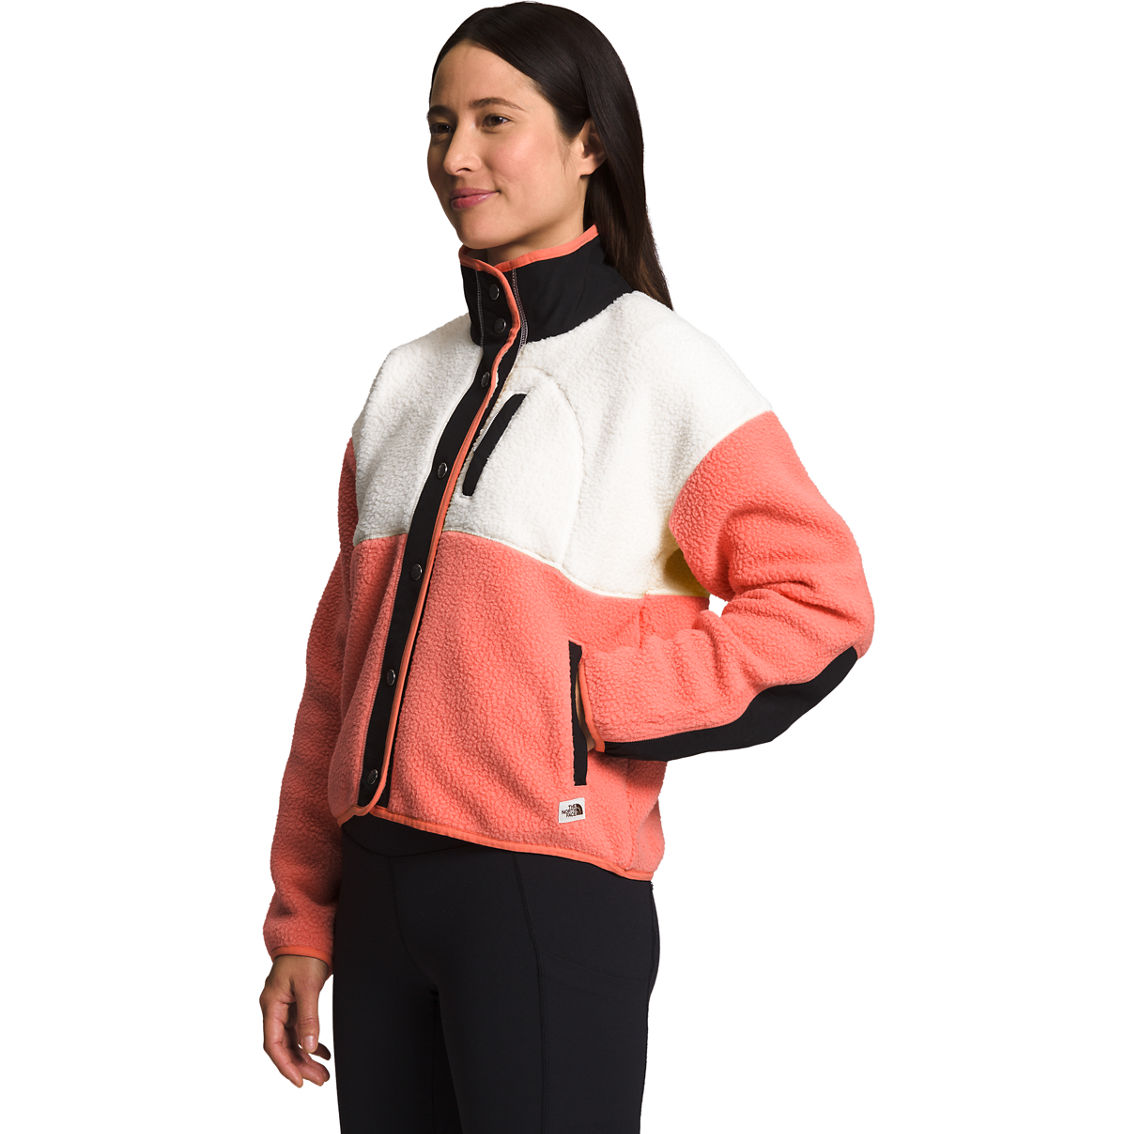 The North Face Cragmont Fleece Coat, Jackets, Clothing & Accessories